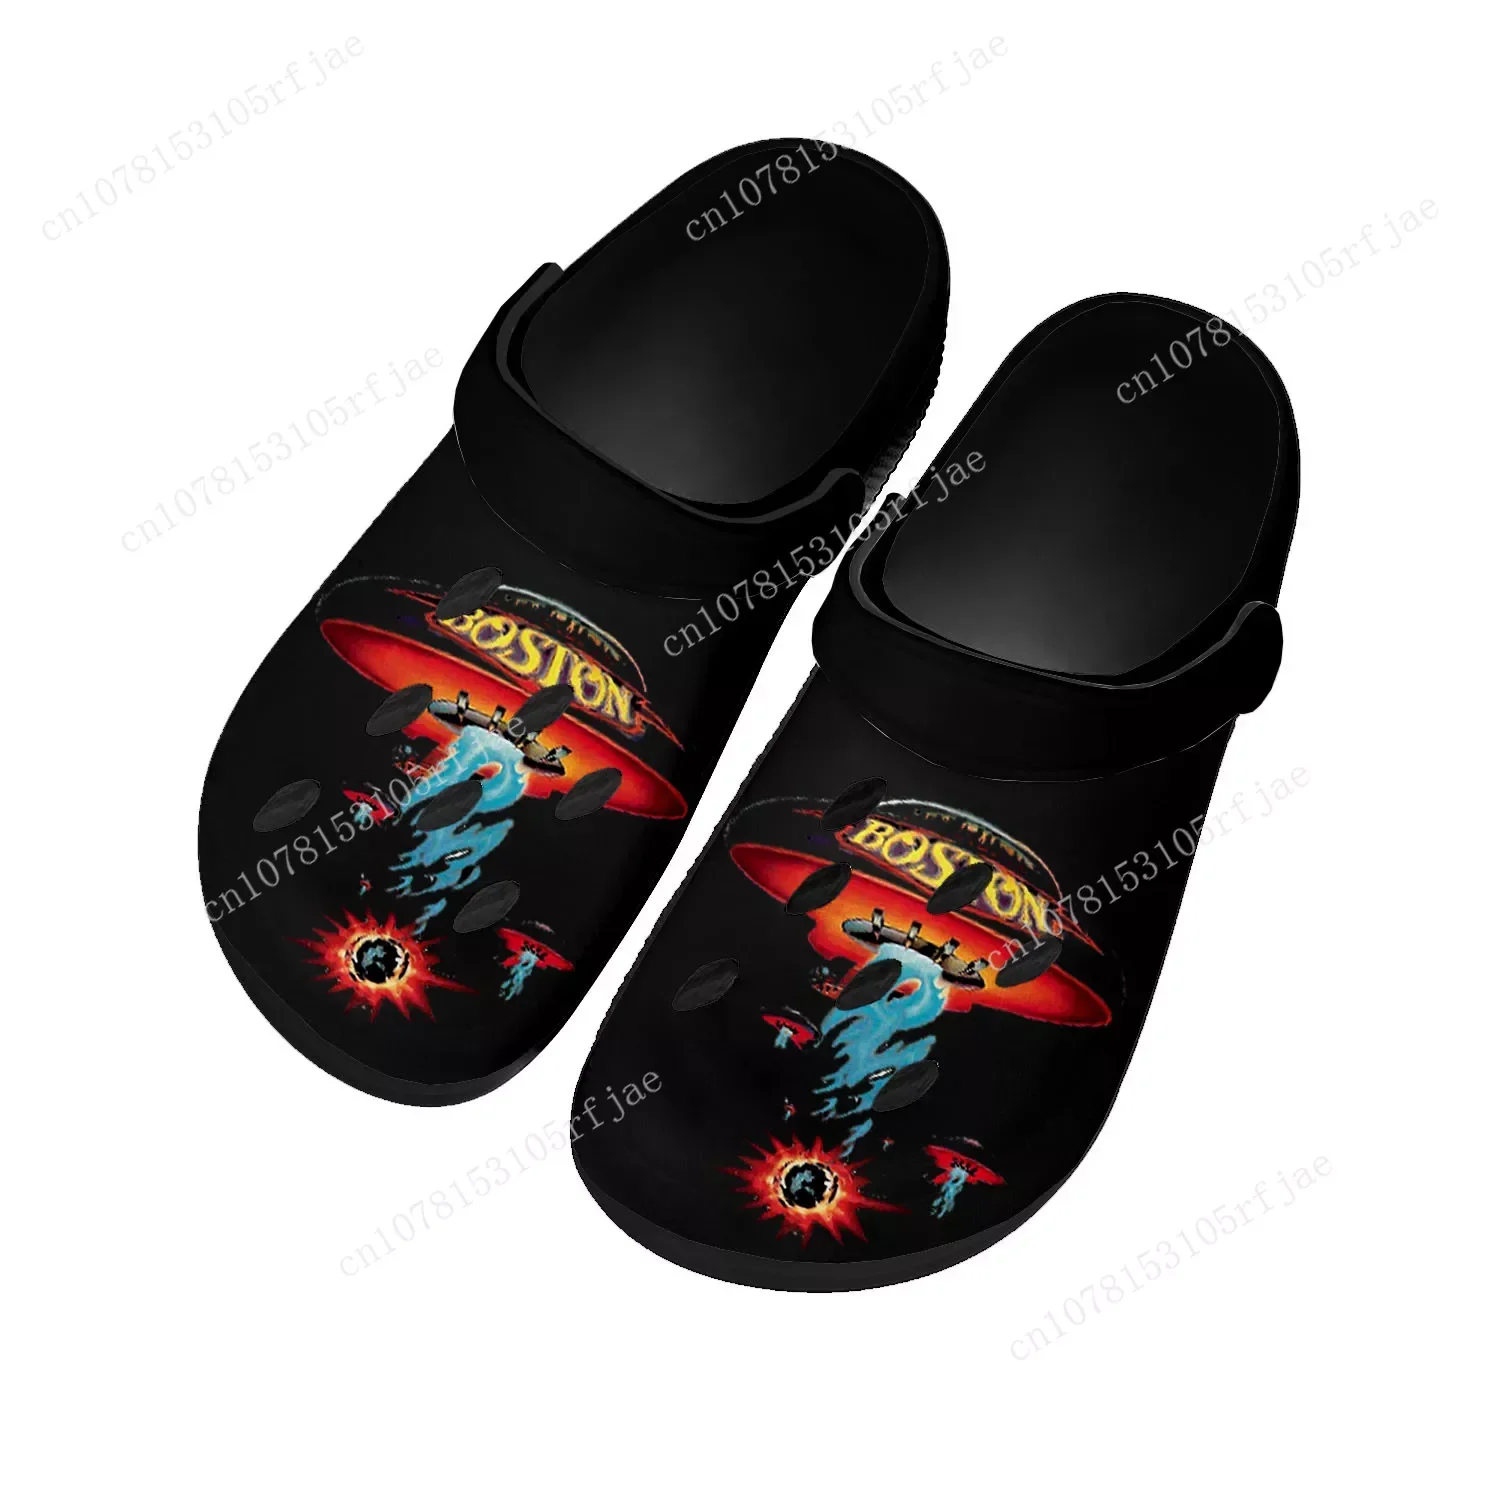 

Boston Band Rock Band Home Clogs Custom Water Shoes Mens Womens Teenager Shoe Garden Clog Breathable Beach Hole Slippers Black